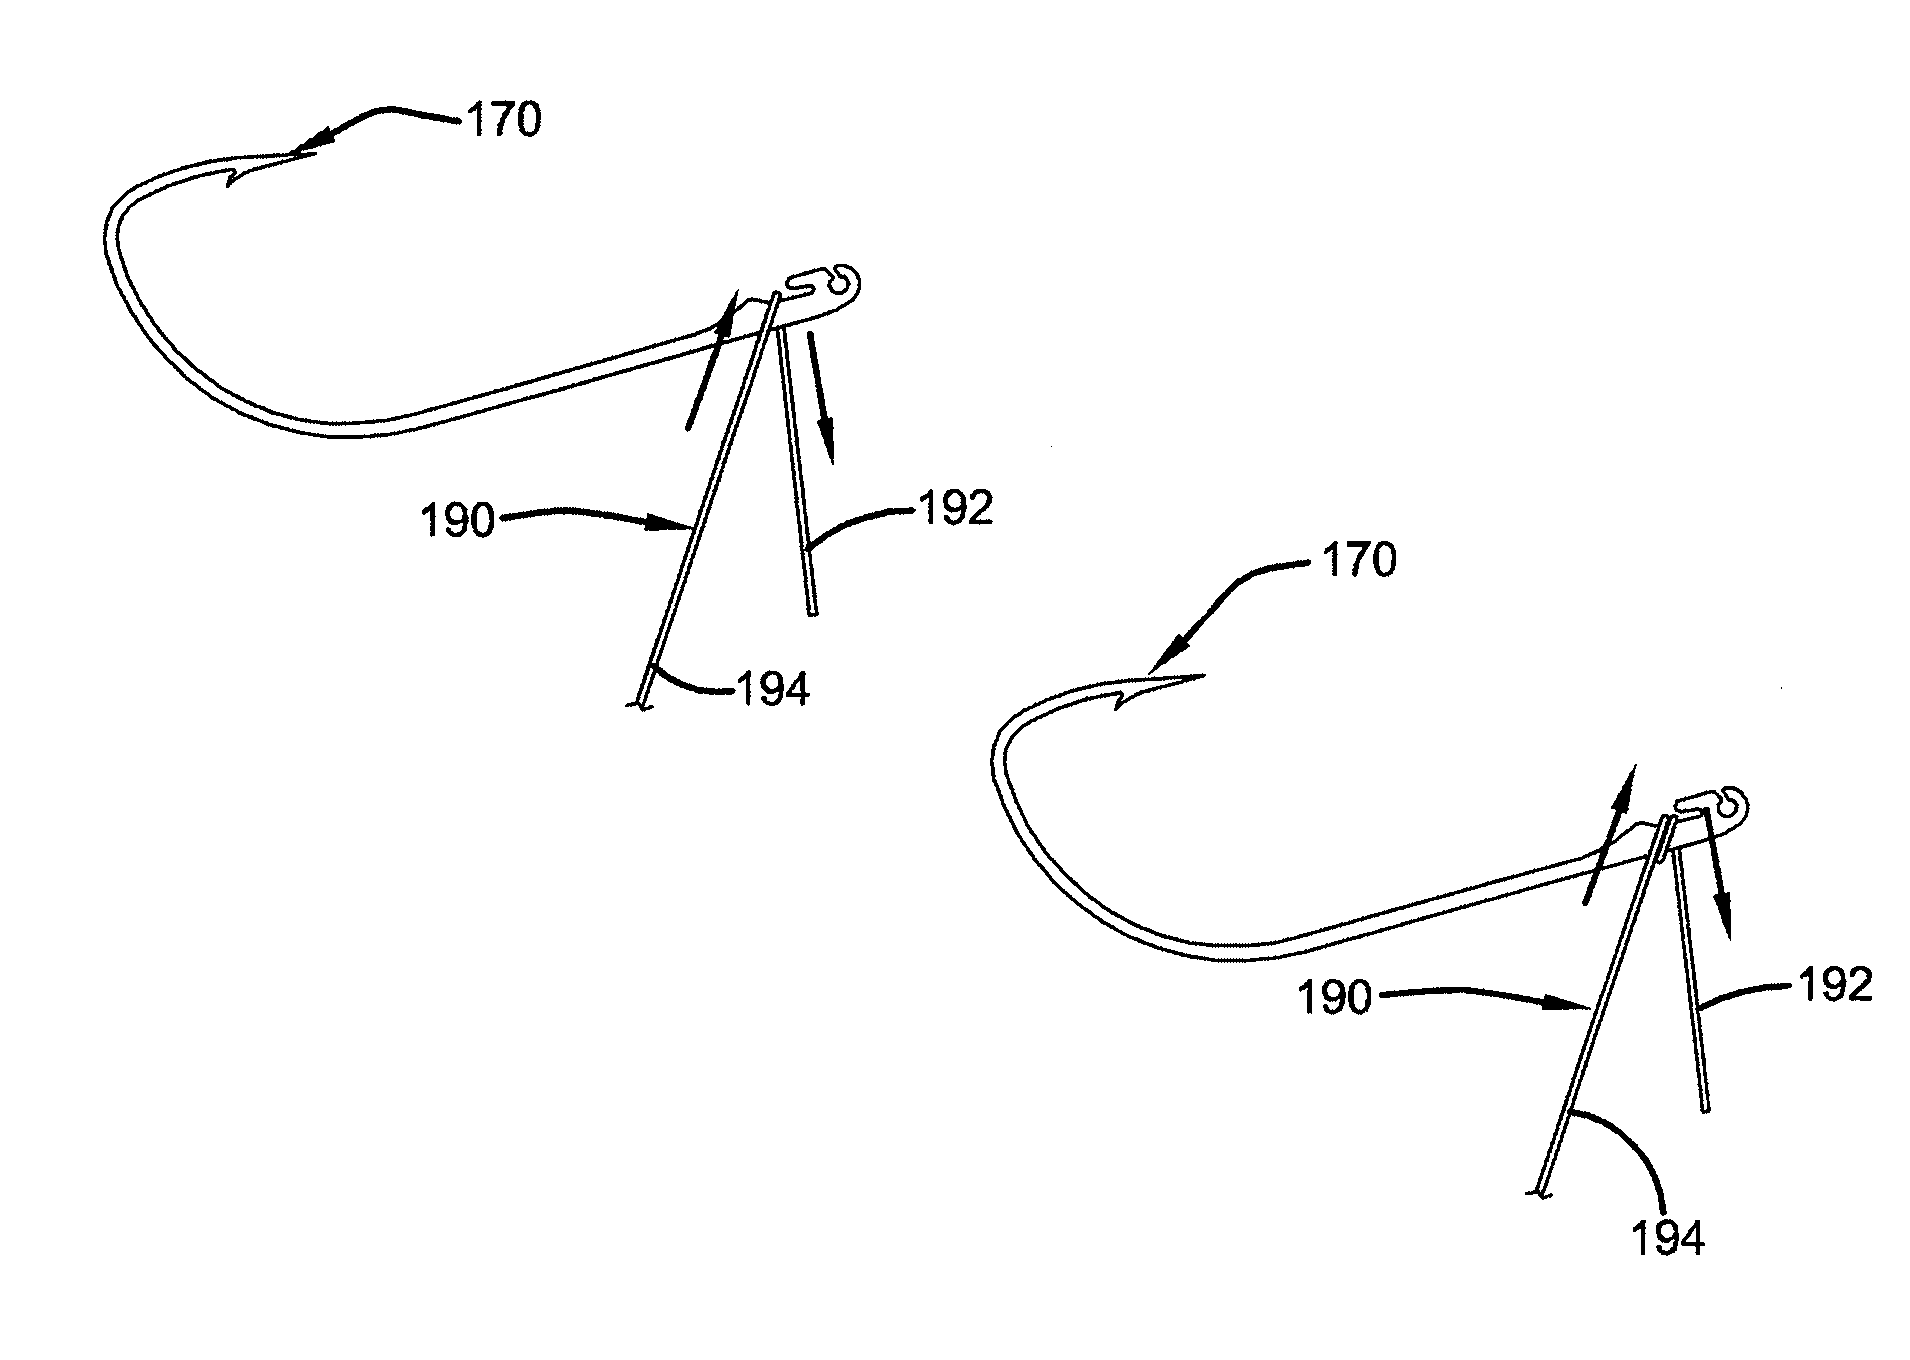 Line connector apparatus and method